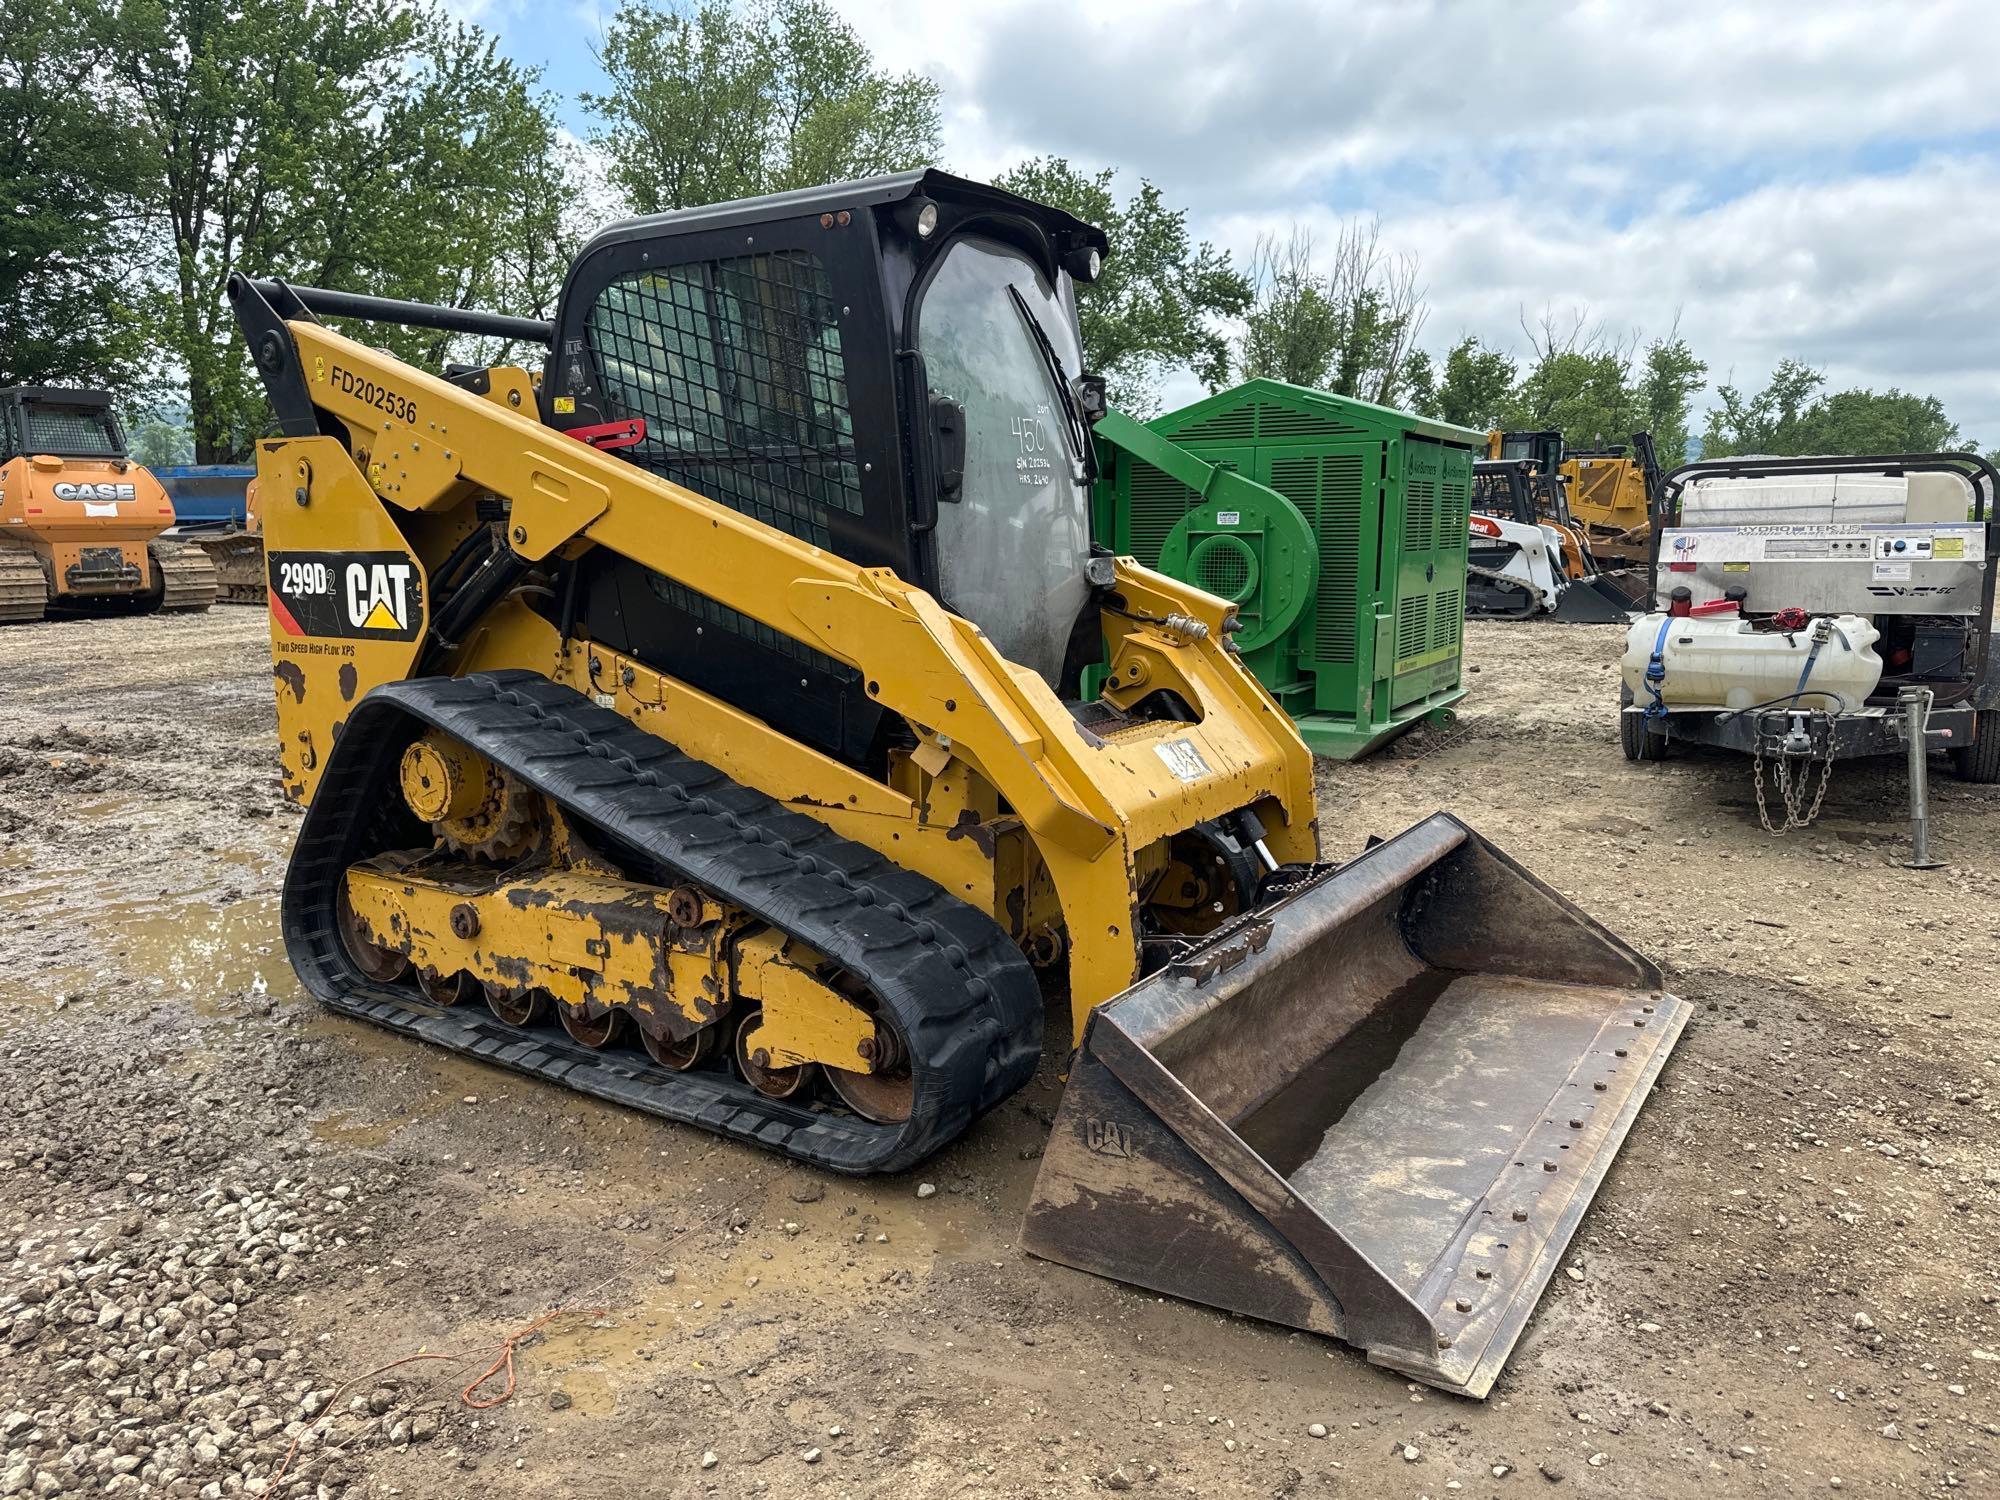 2017 CAT 299D2XPS RUBBER TRACKED SKID STEER SN:FD202536 powered by Cat diesel engine, equipped with